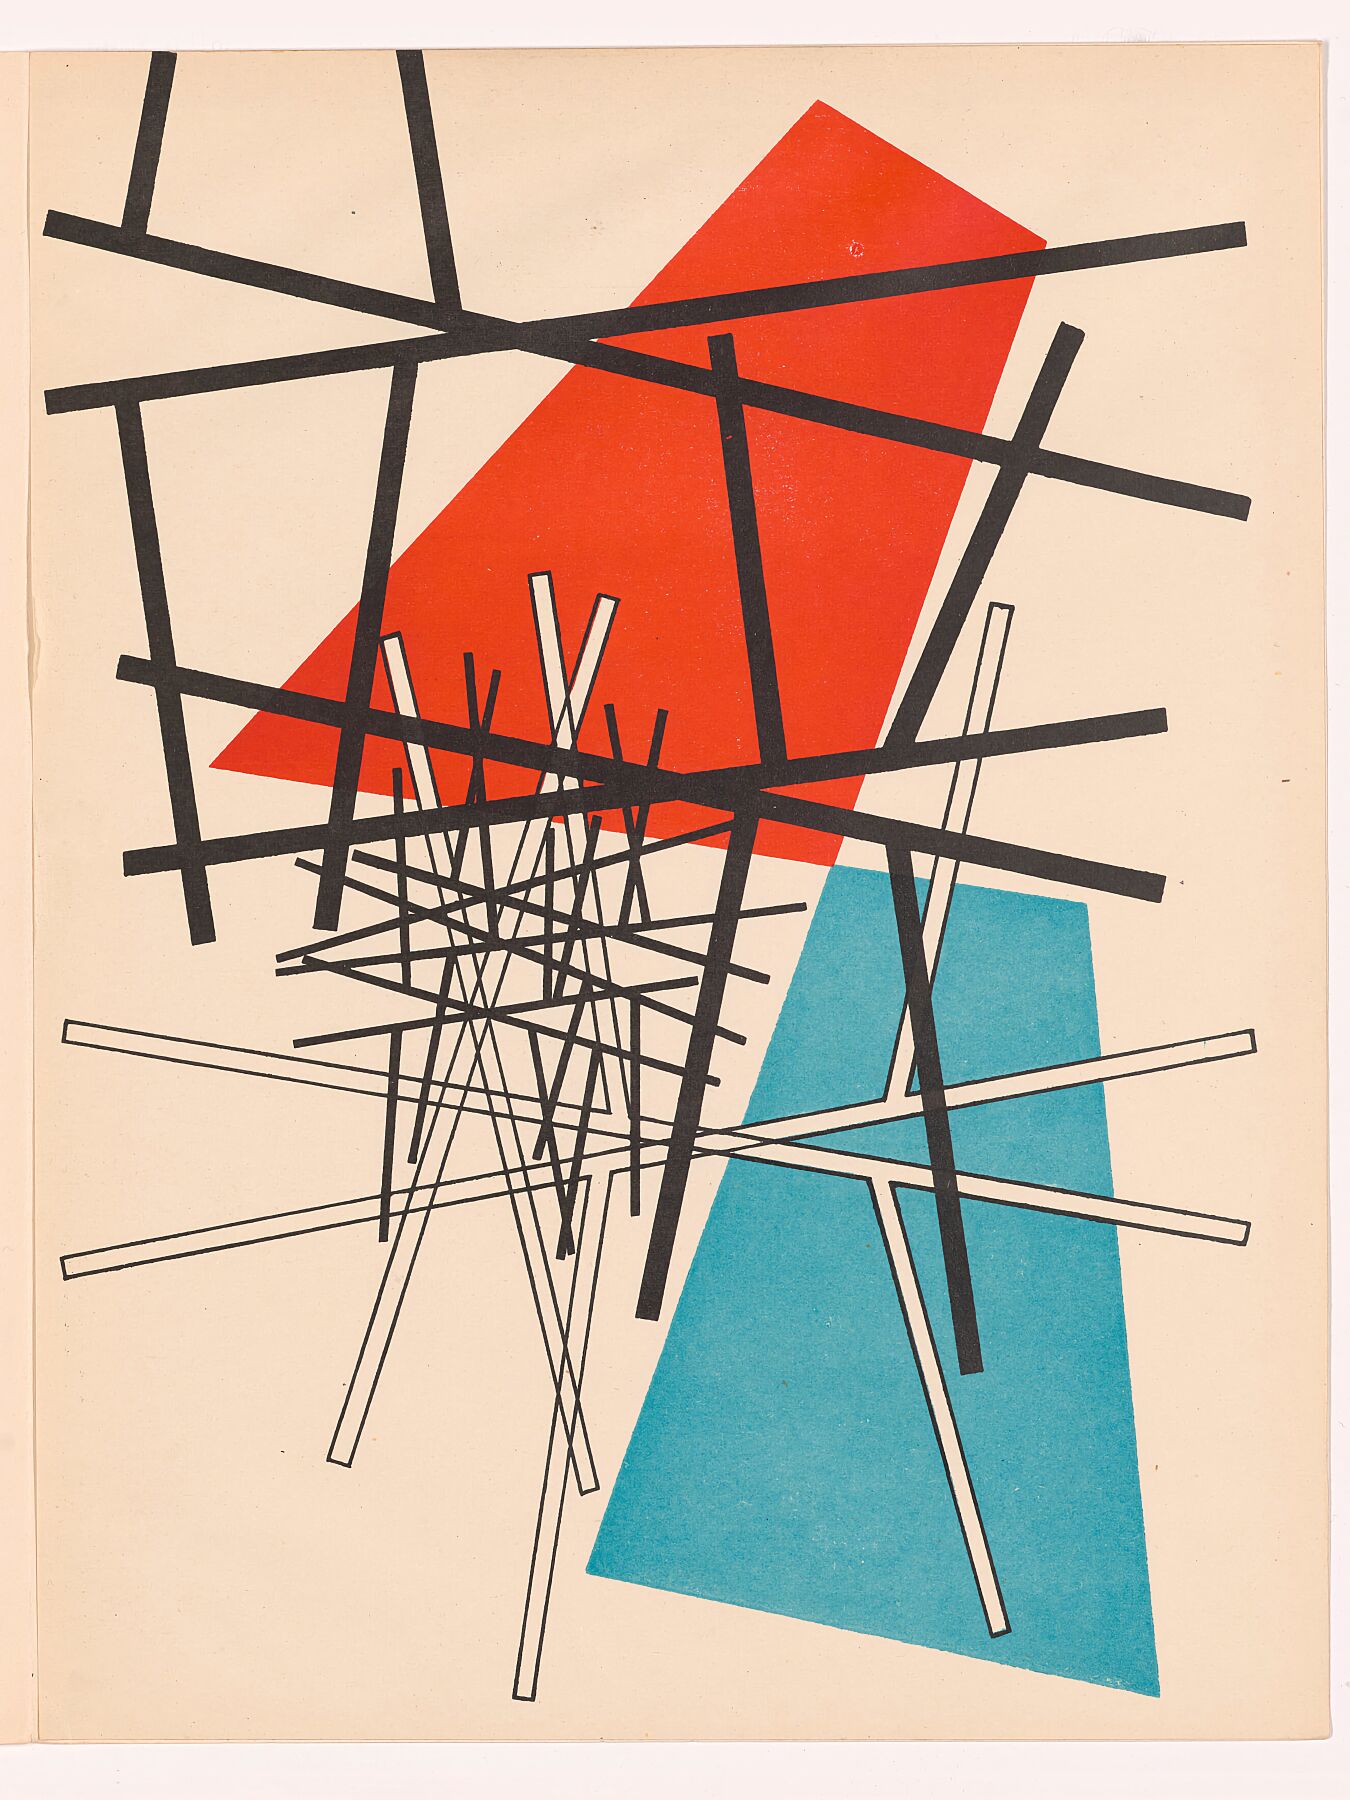 Plate from 10 Origin by Sophie Taeuber-Arp - 1942